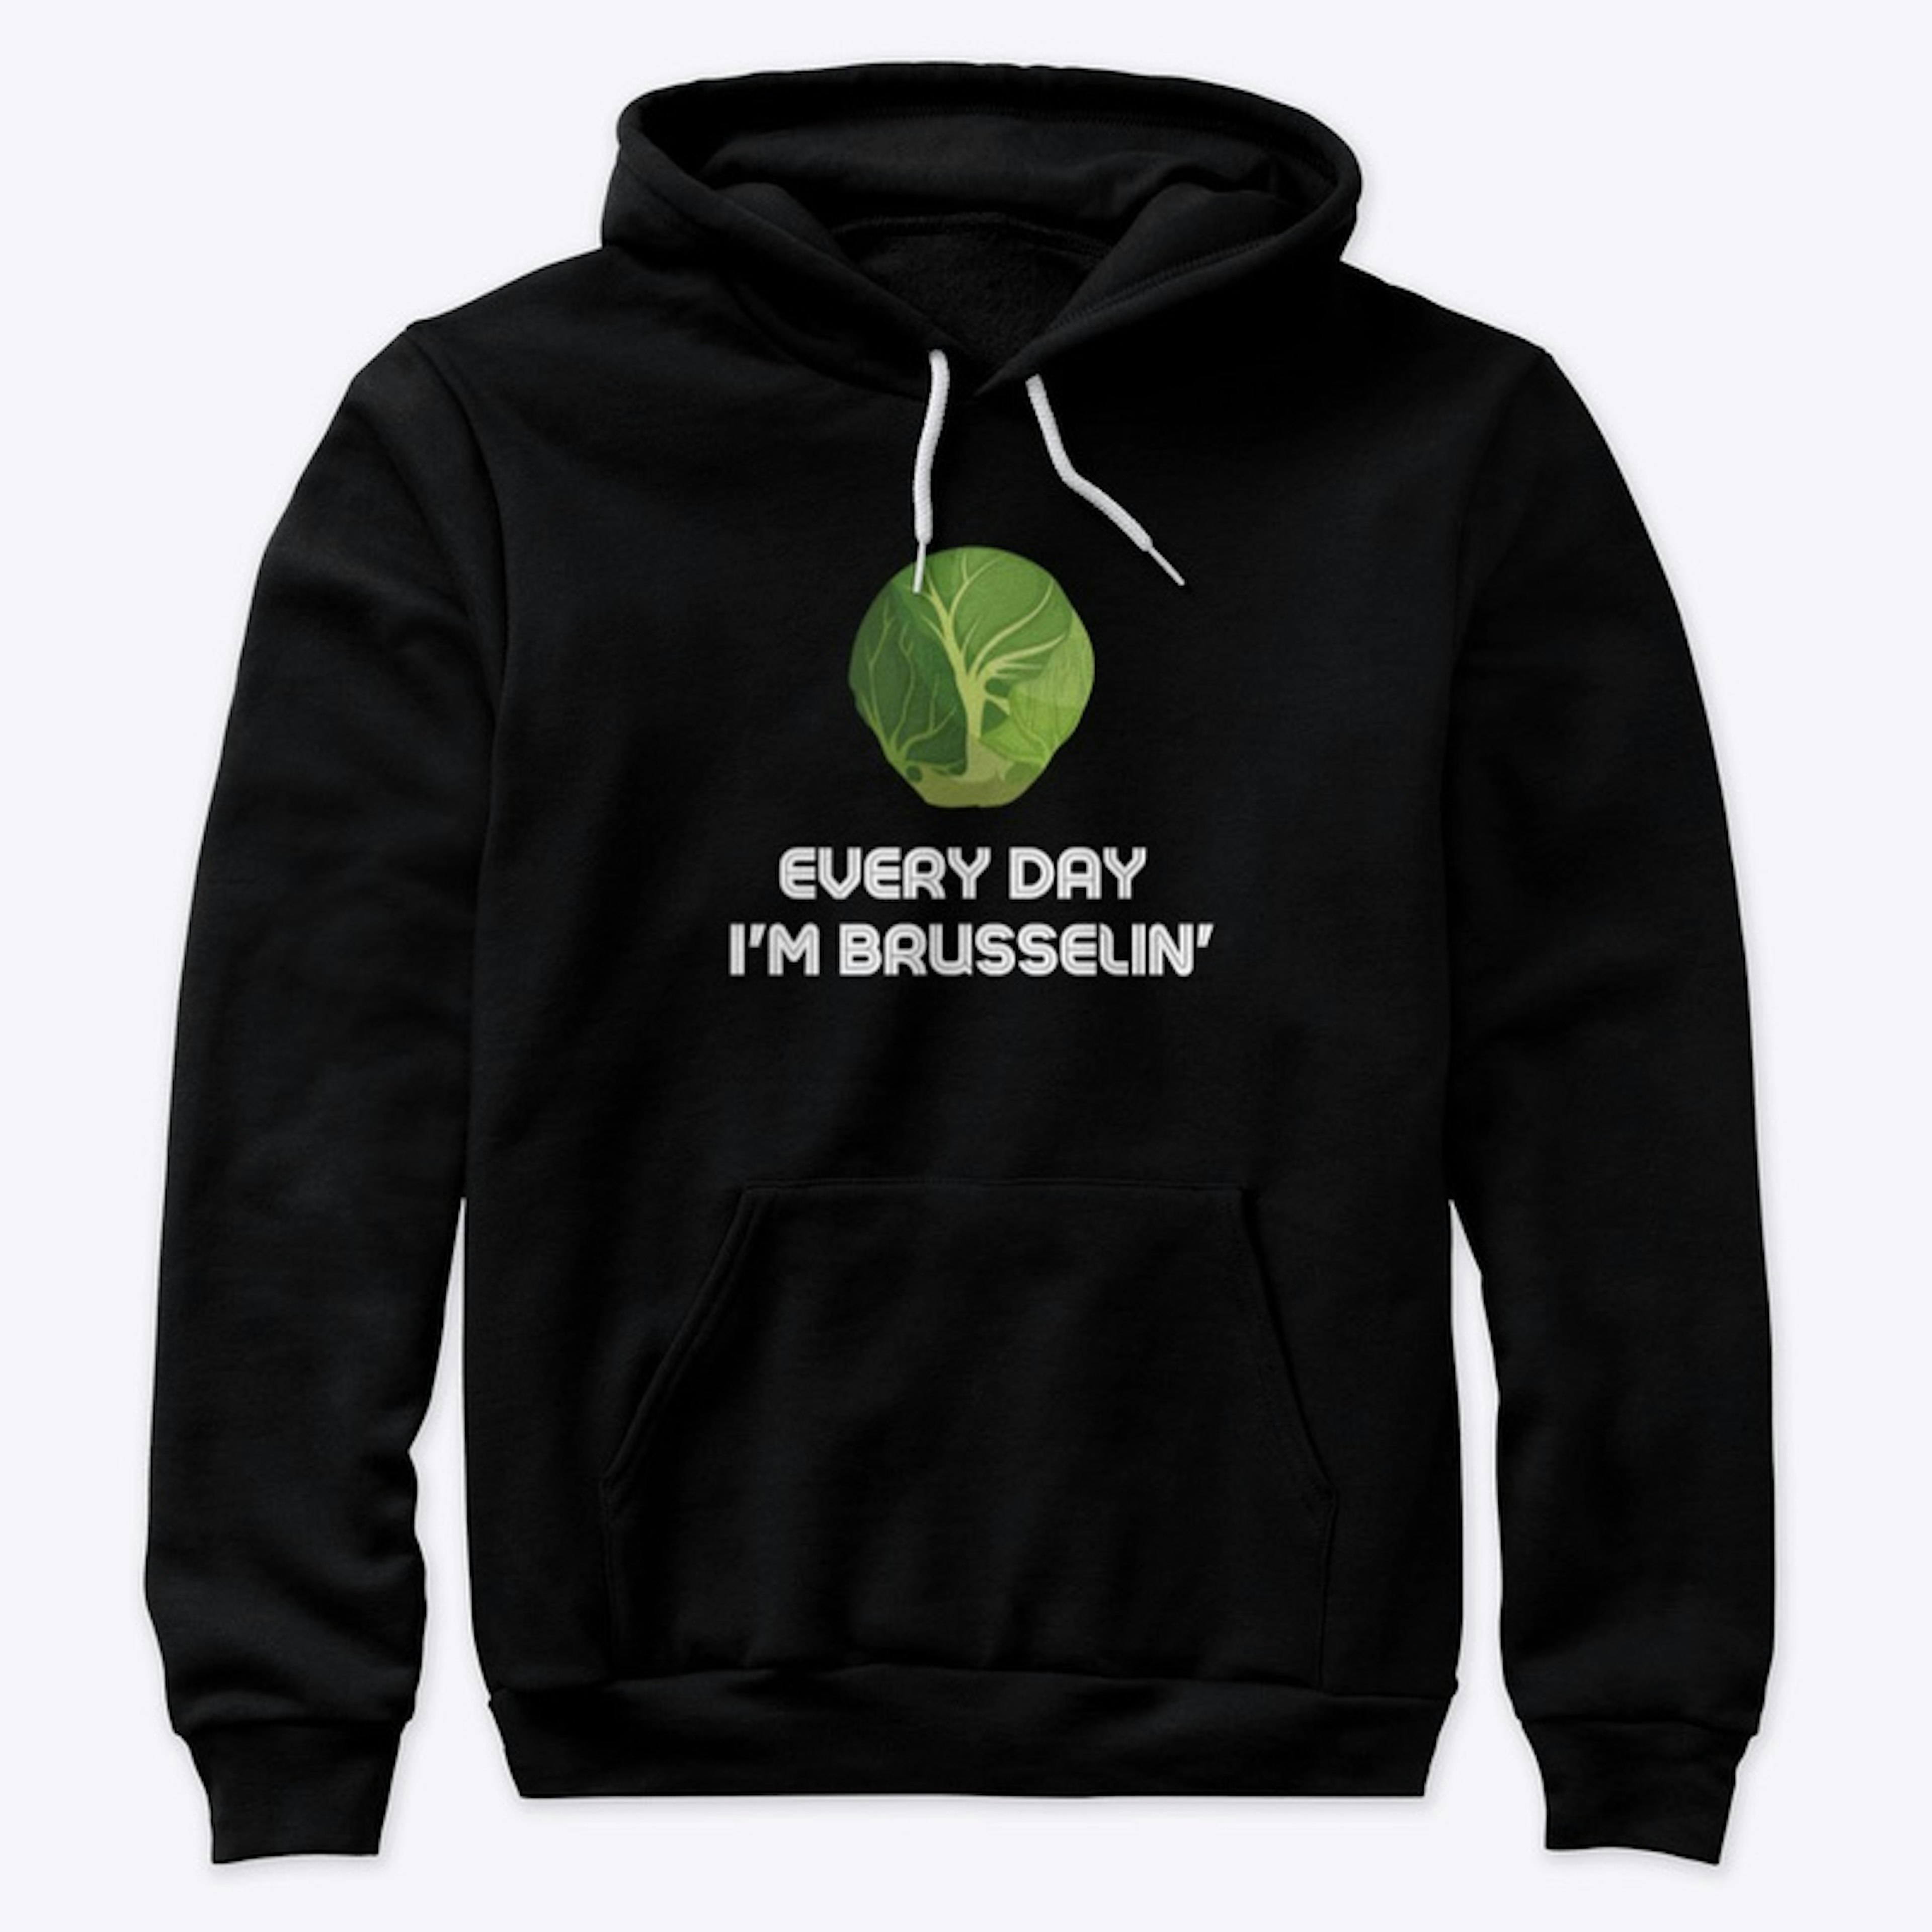 Every Day I'm Brusselin'